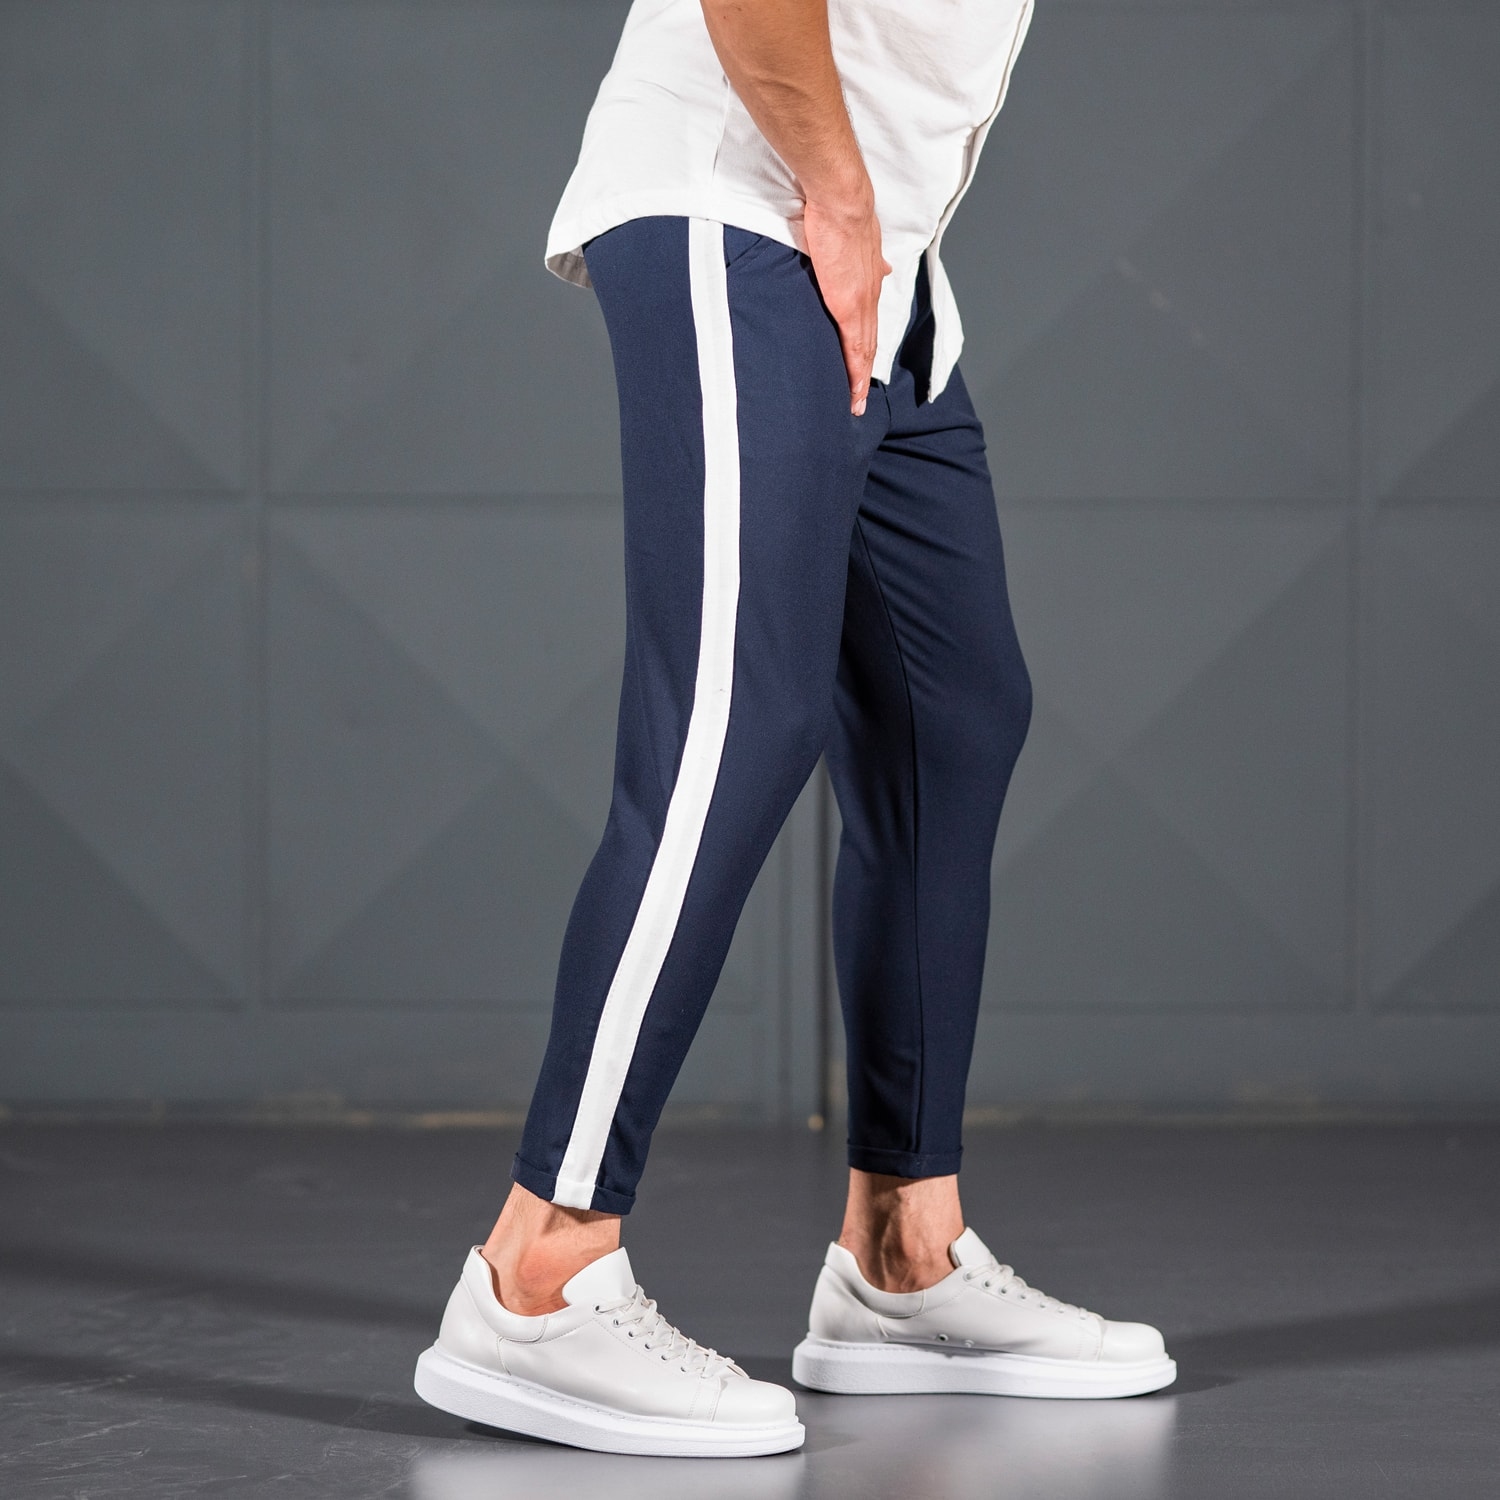 blue pants with white shoes